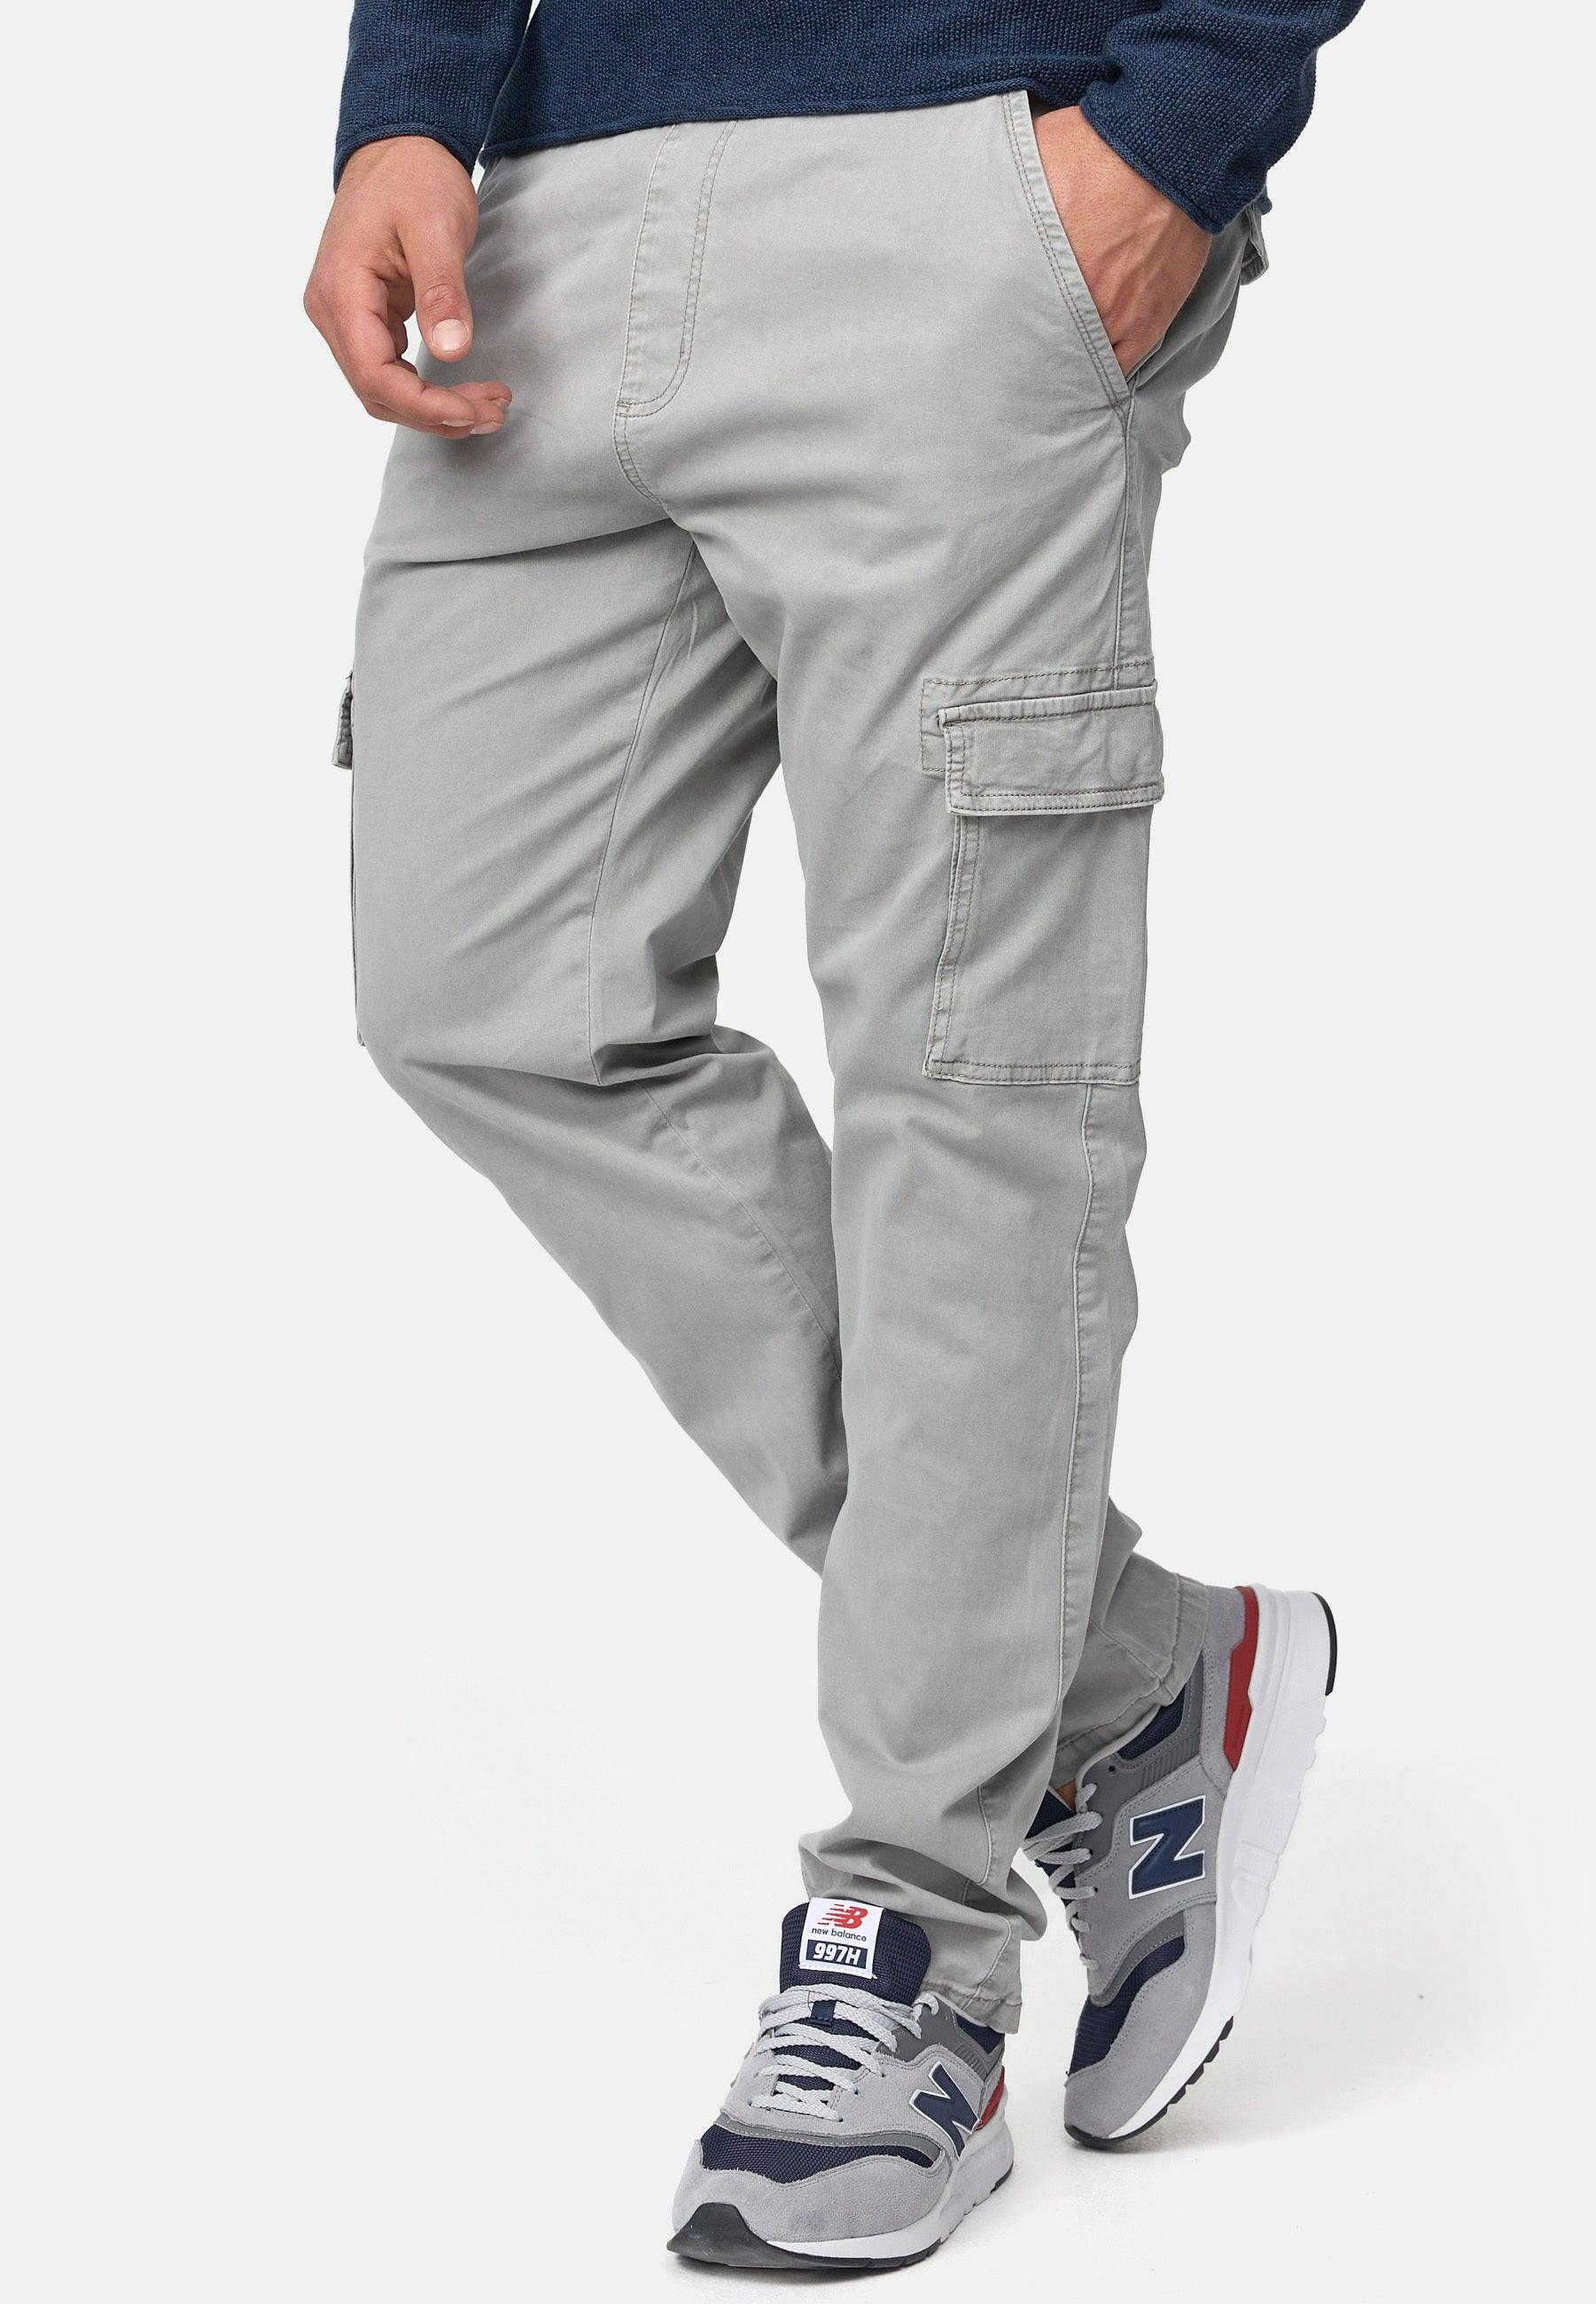 Cargo Pant For Women  Girls Trousers  Pants